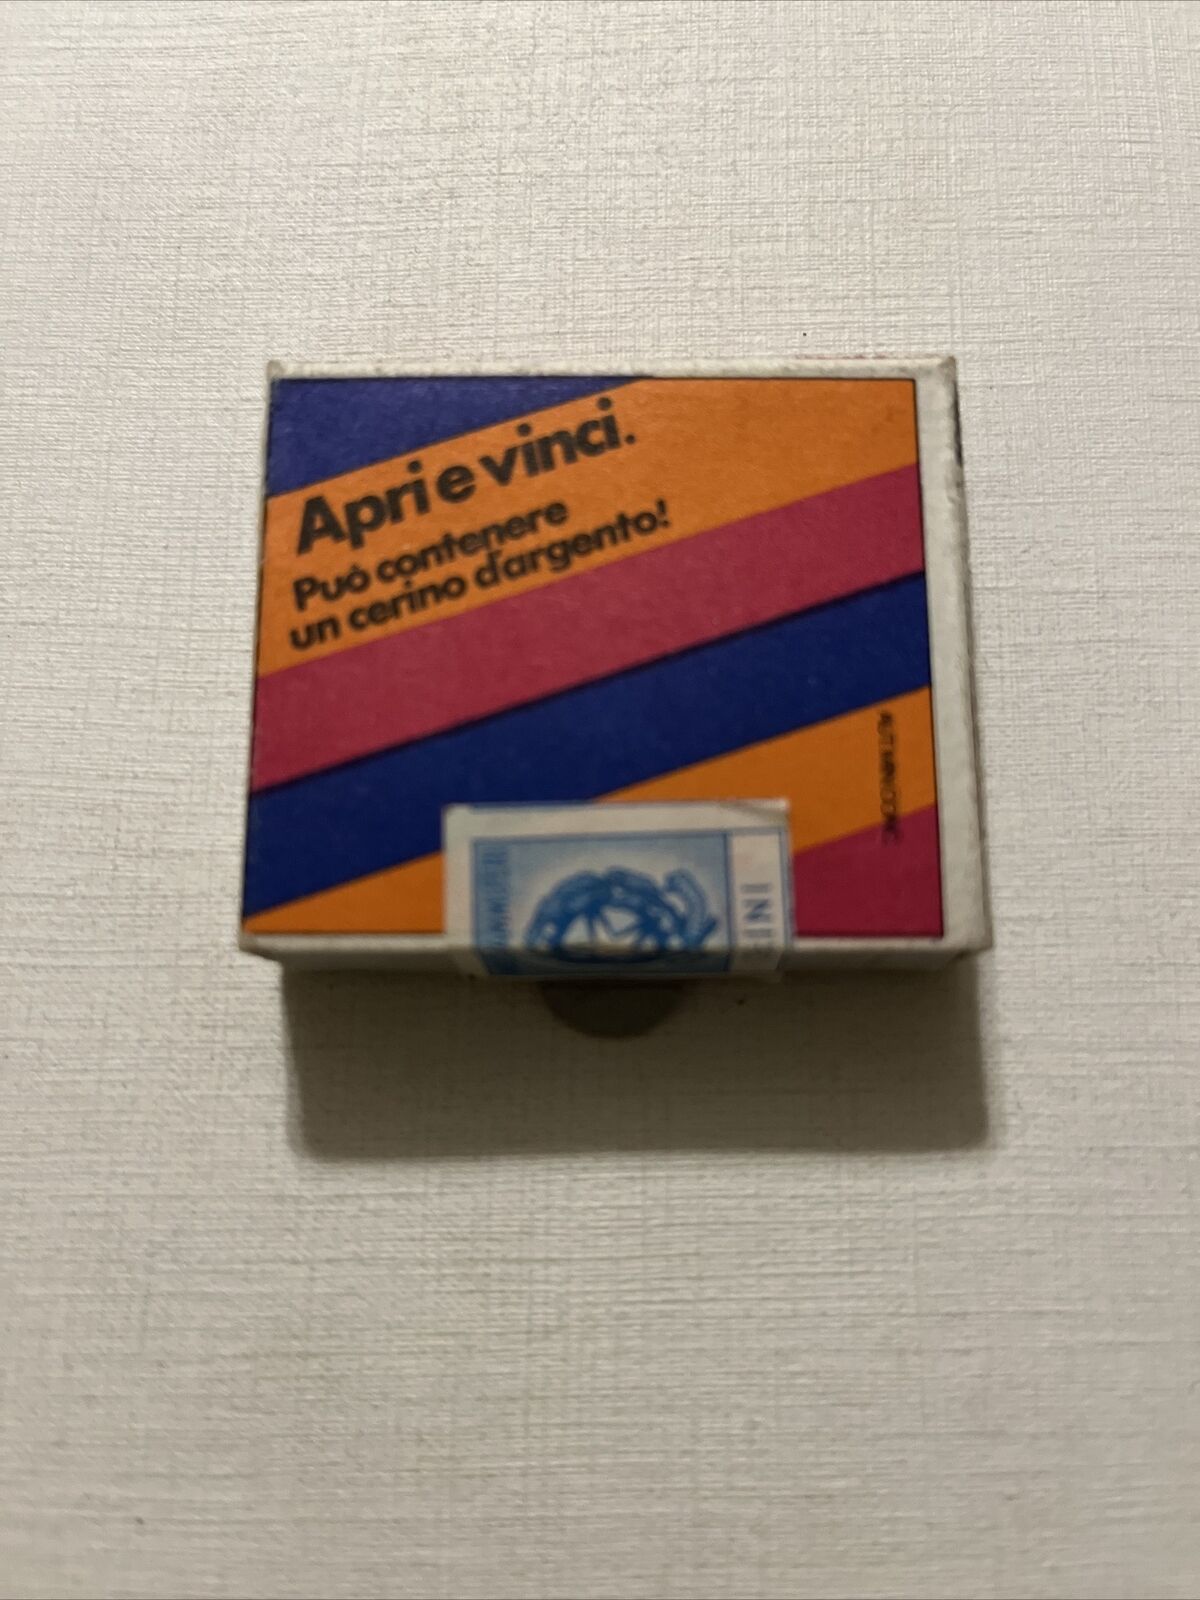 Matchbox Unstruck Sealed, In Italian “Open And Win, May Contain A Silver Match”